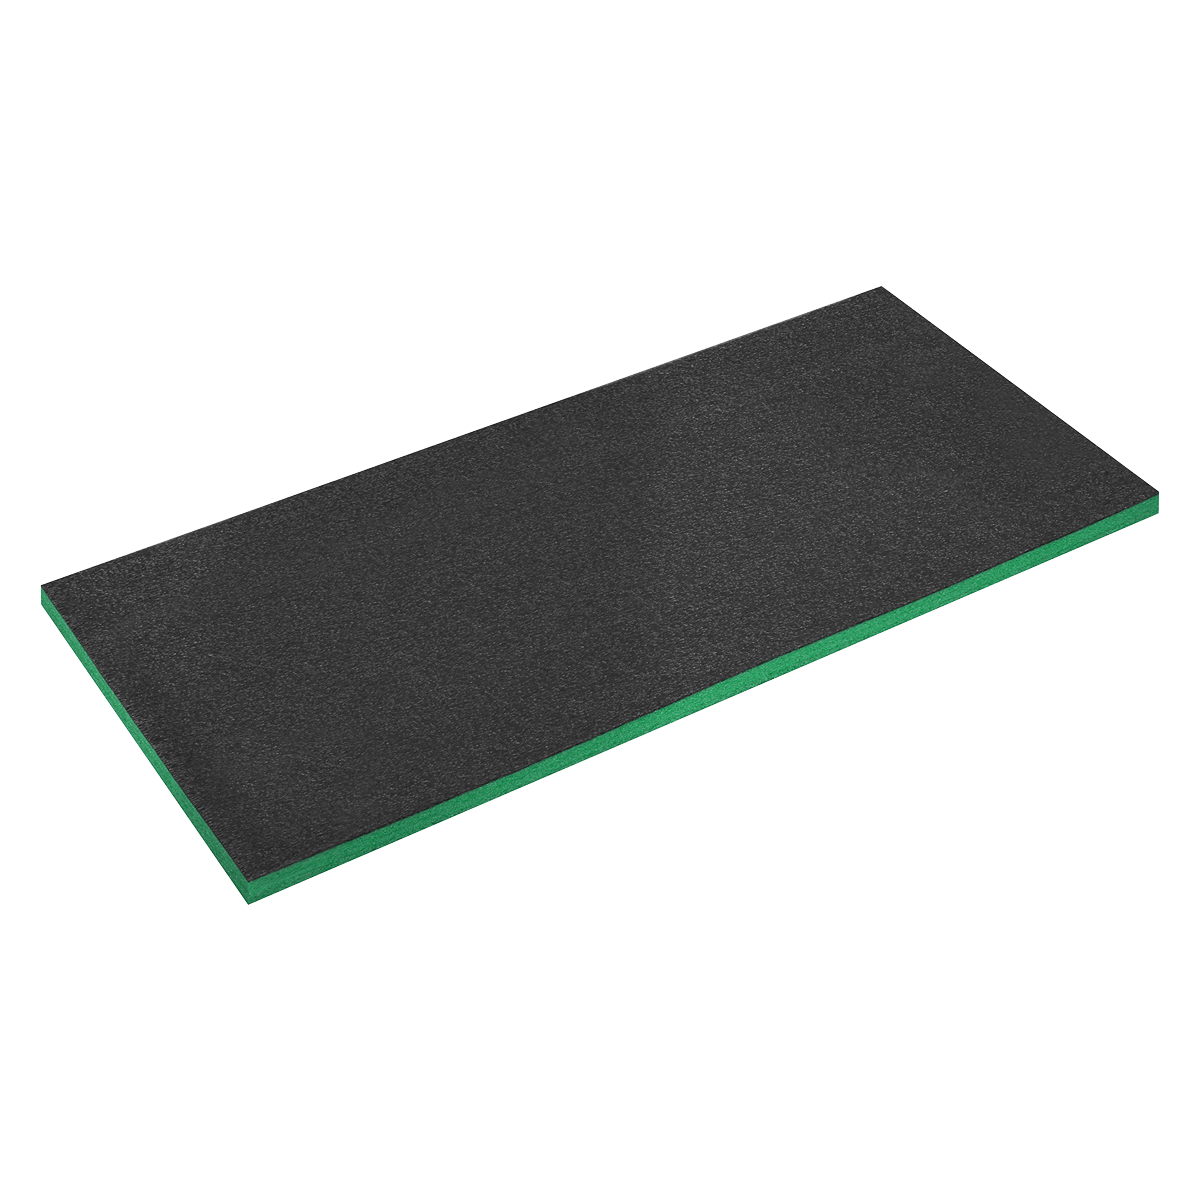 Sealey Easy Peel Shadow Foam® Green/Black 1200 x 550 x 30mm SF30G, Create your own tool tray inserts with this easy peel foam.